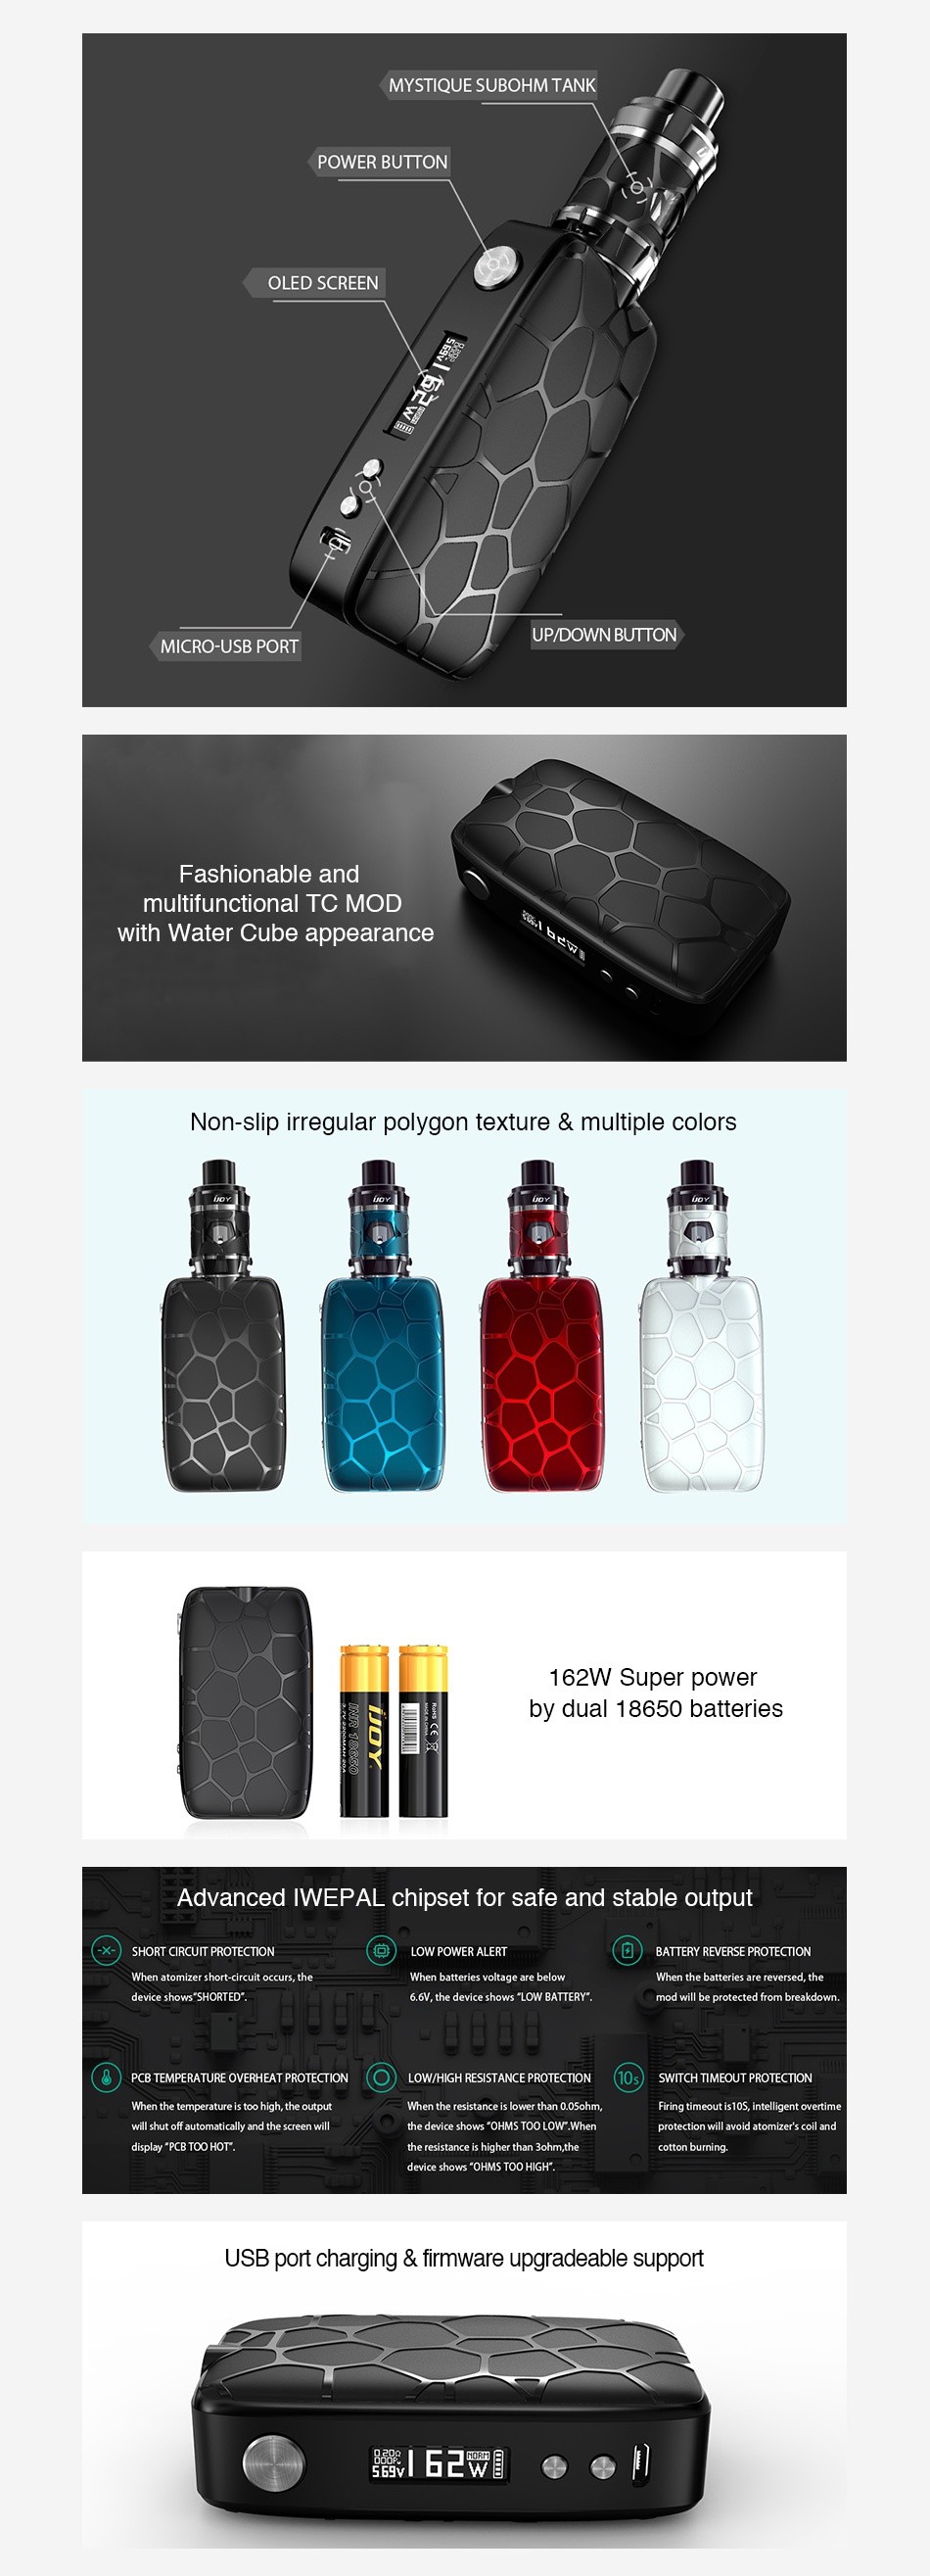 IJOY Mystique 162W TC Kit with Mystique Subohm Tank MYSTIQUE SUBOHM TANK POWER BUTTON OLED SCREEN ICRO USB PORT UP DOWN BUTTON Fashionable and multifunctional TC MOD with Water Cube appearance Non slip irregular polygon texture multiple colors 62W Super powe by dual 18650 batteries Advanced IWEPAL chipset for safe and stable output When batteries voitage are belew vice sho    SHCRTD  he devices mod wiil be protecte PCB TEMPERATURE OVERHEAT PRCTESTICN LOW HIGH RESISTANCE PRCTECTICN SwITC  TIMECUT PROTECTION firing imeout b105  inte ligent overtime will shl d dyy PCe TC HoT the nesistance is hic ha than 3ohm the USB port charging  firmware upgradeable support eE e